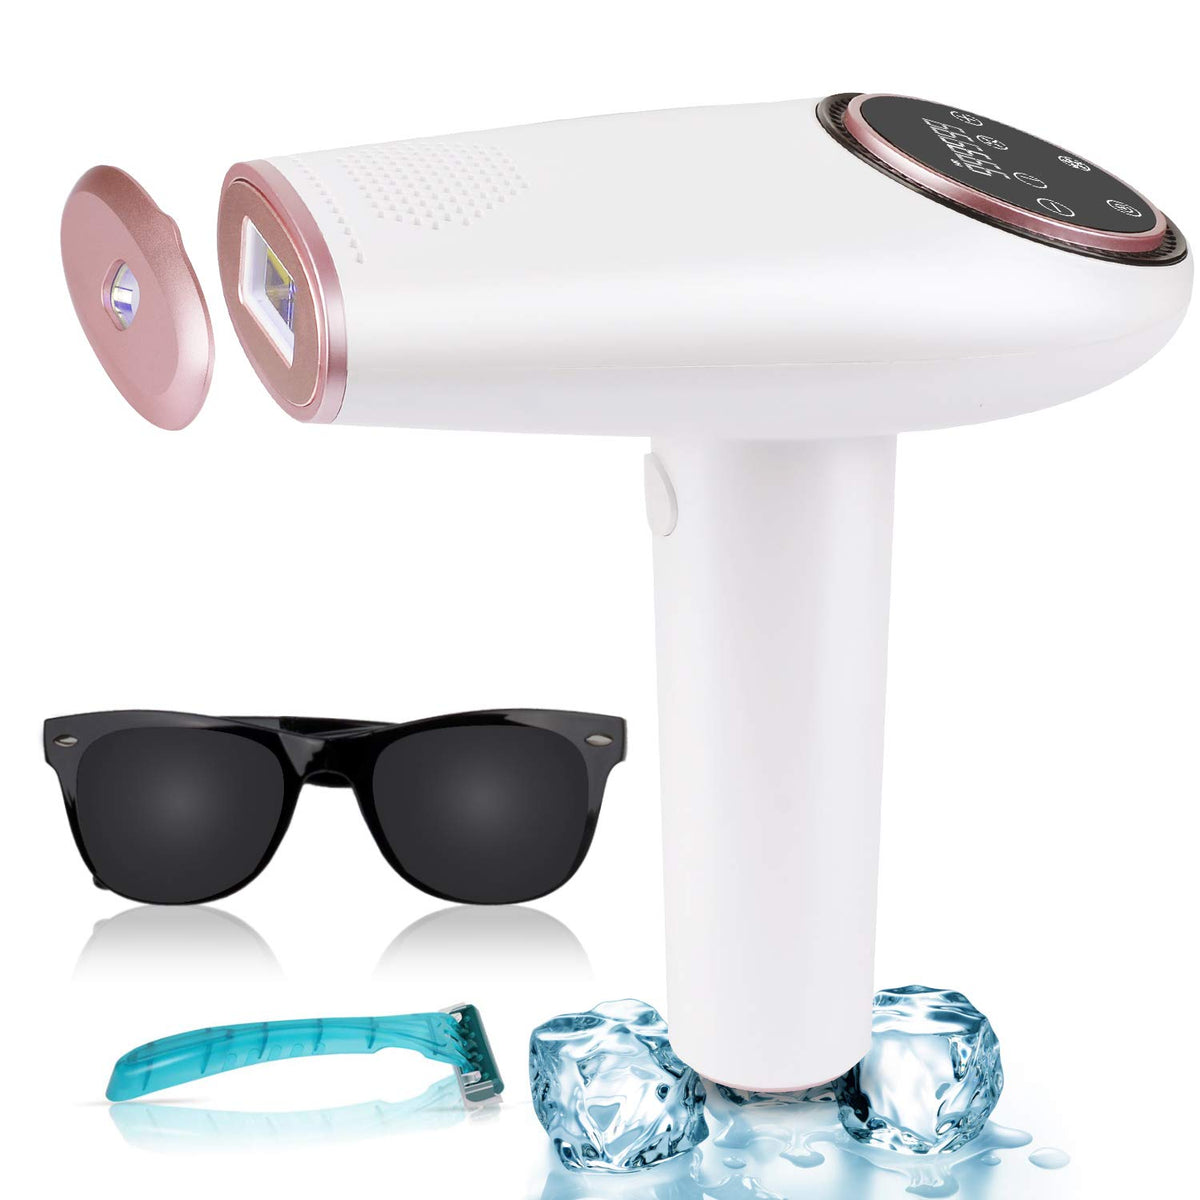 Hair Removal for Women and Men Permanent Flashes ICE Cooling Painless Device Hair Remover Laser System Home Use,ICE1